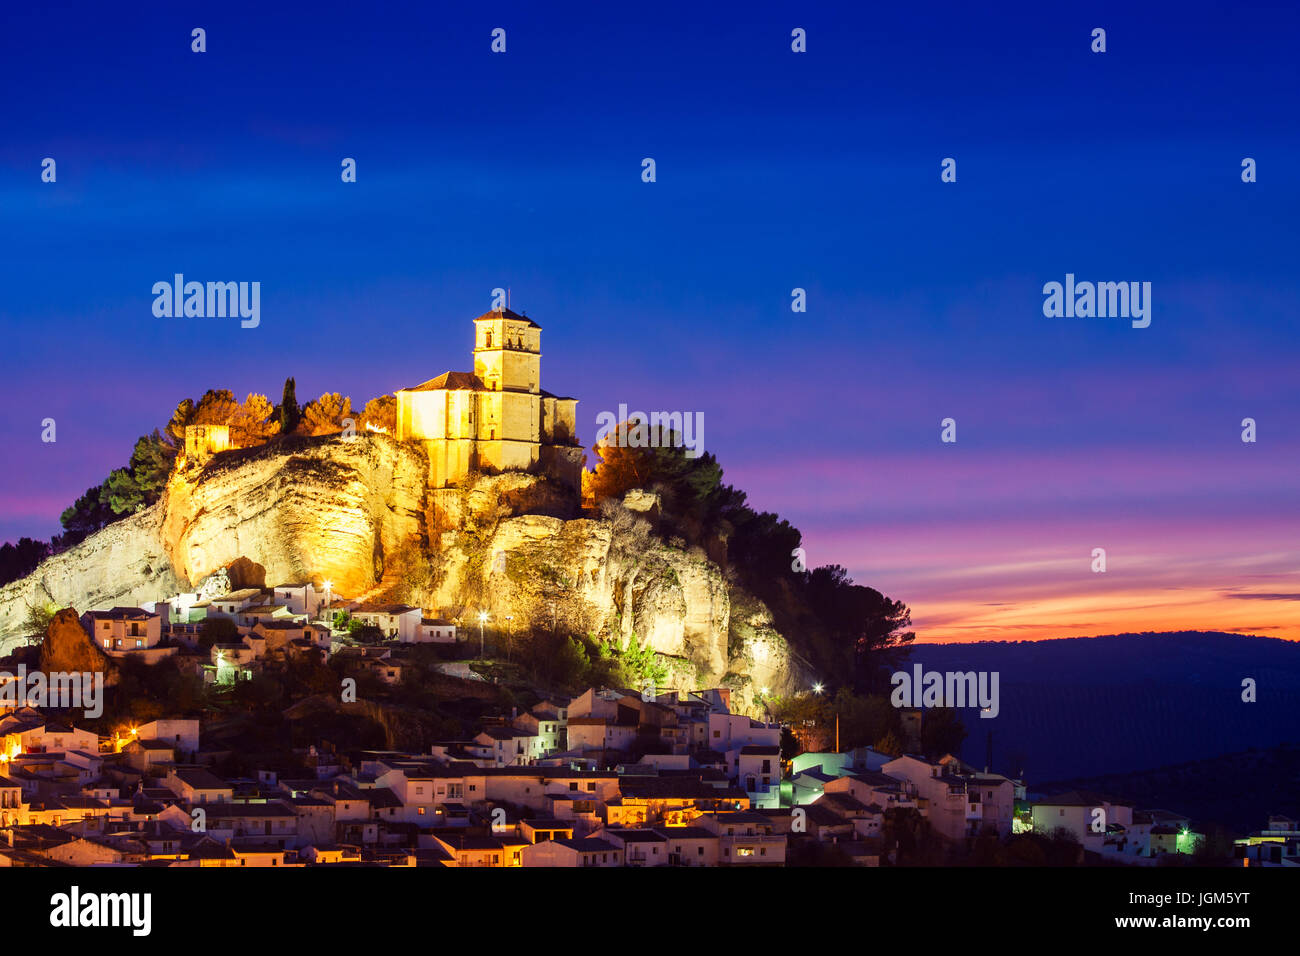 Beautiful sunset in Montefrio and on top of the the rocky outcrop is the Iglesia de la Villa. Granada, Spain Stock Photo